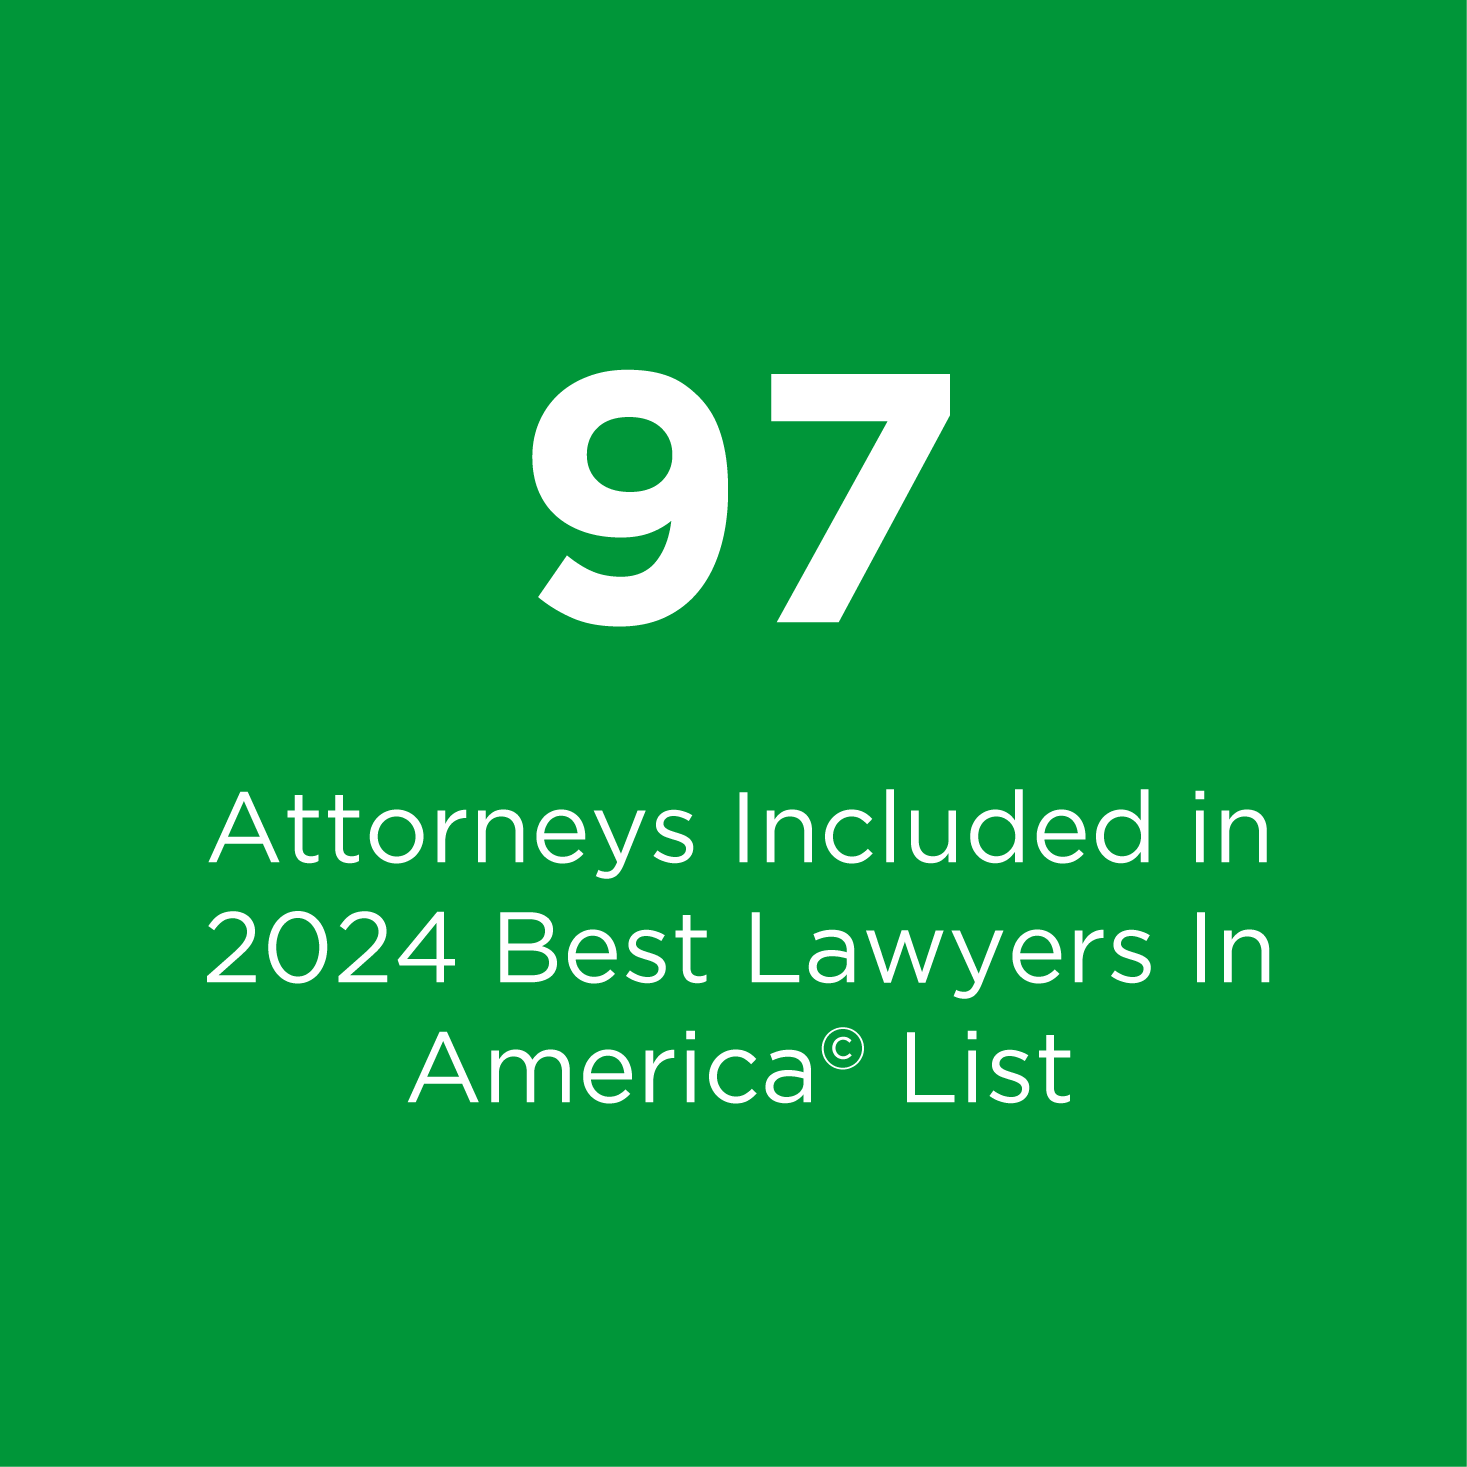 News - 92 Attorneys Included in 2021 Best Lawyers In America© List - 2021